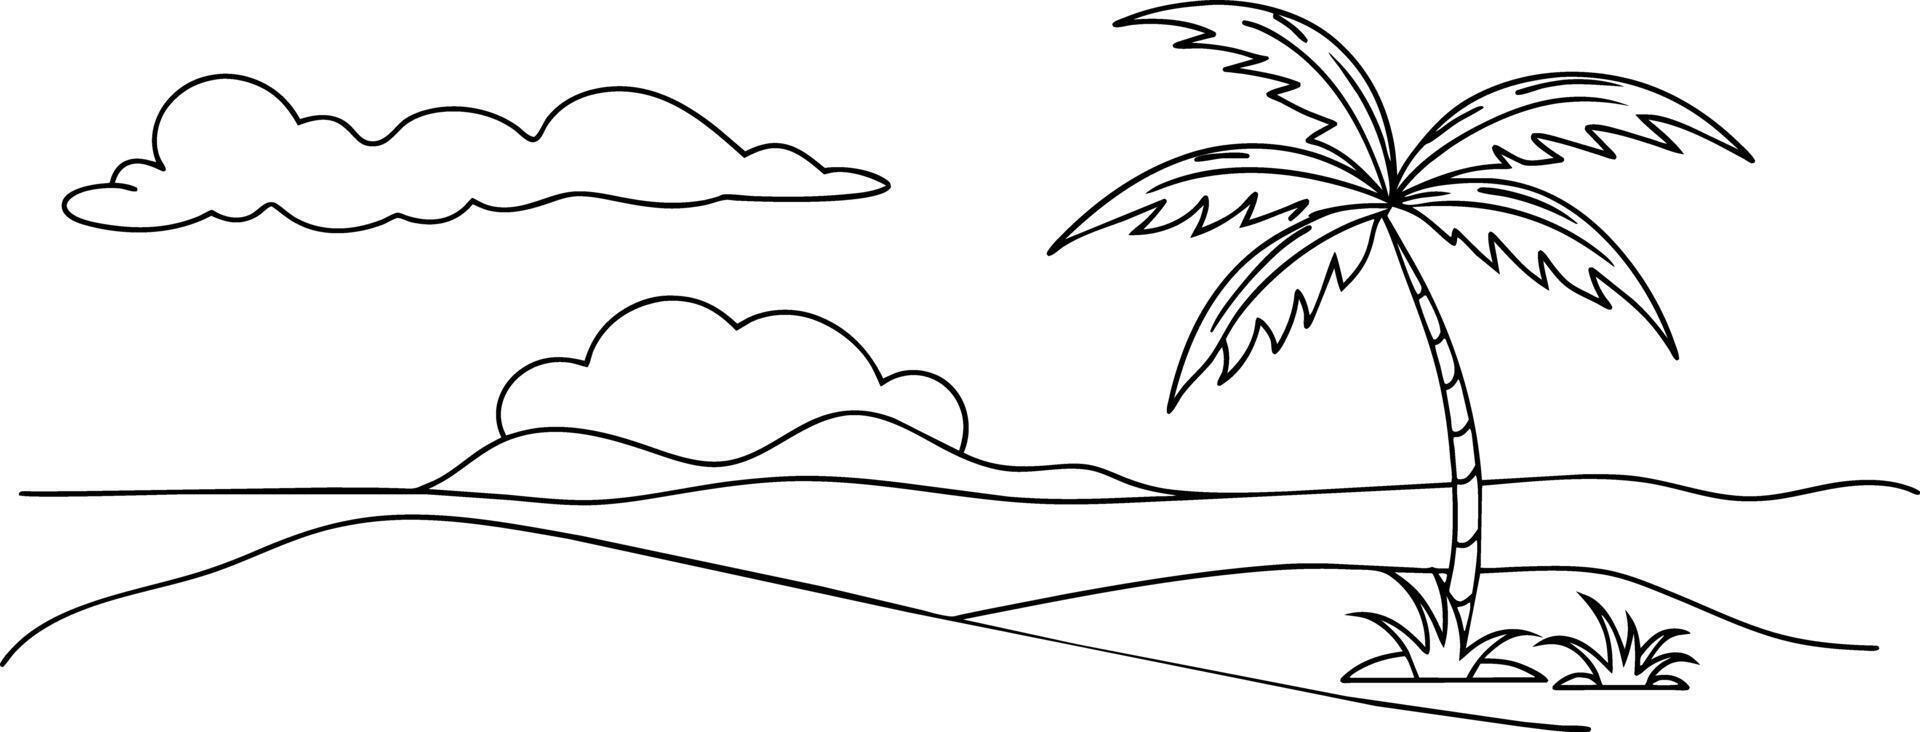 a palm tree and a mountain in the desert coloring page vector